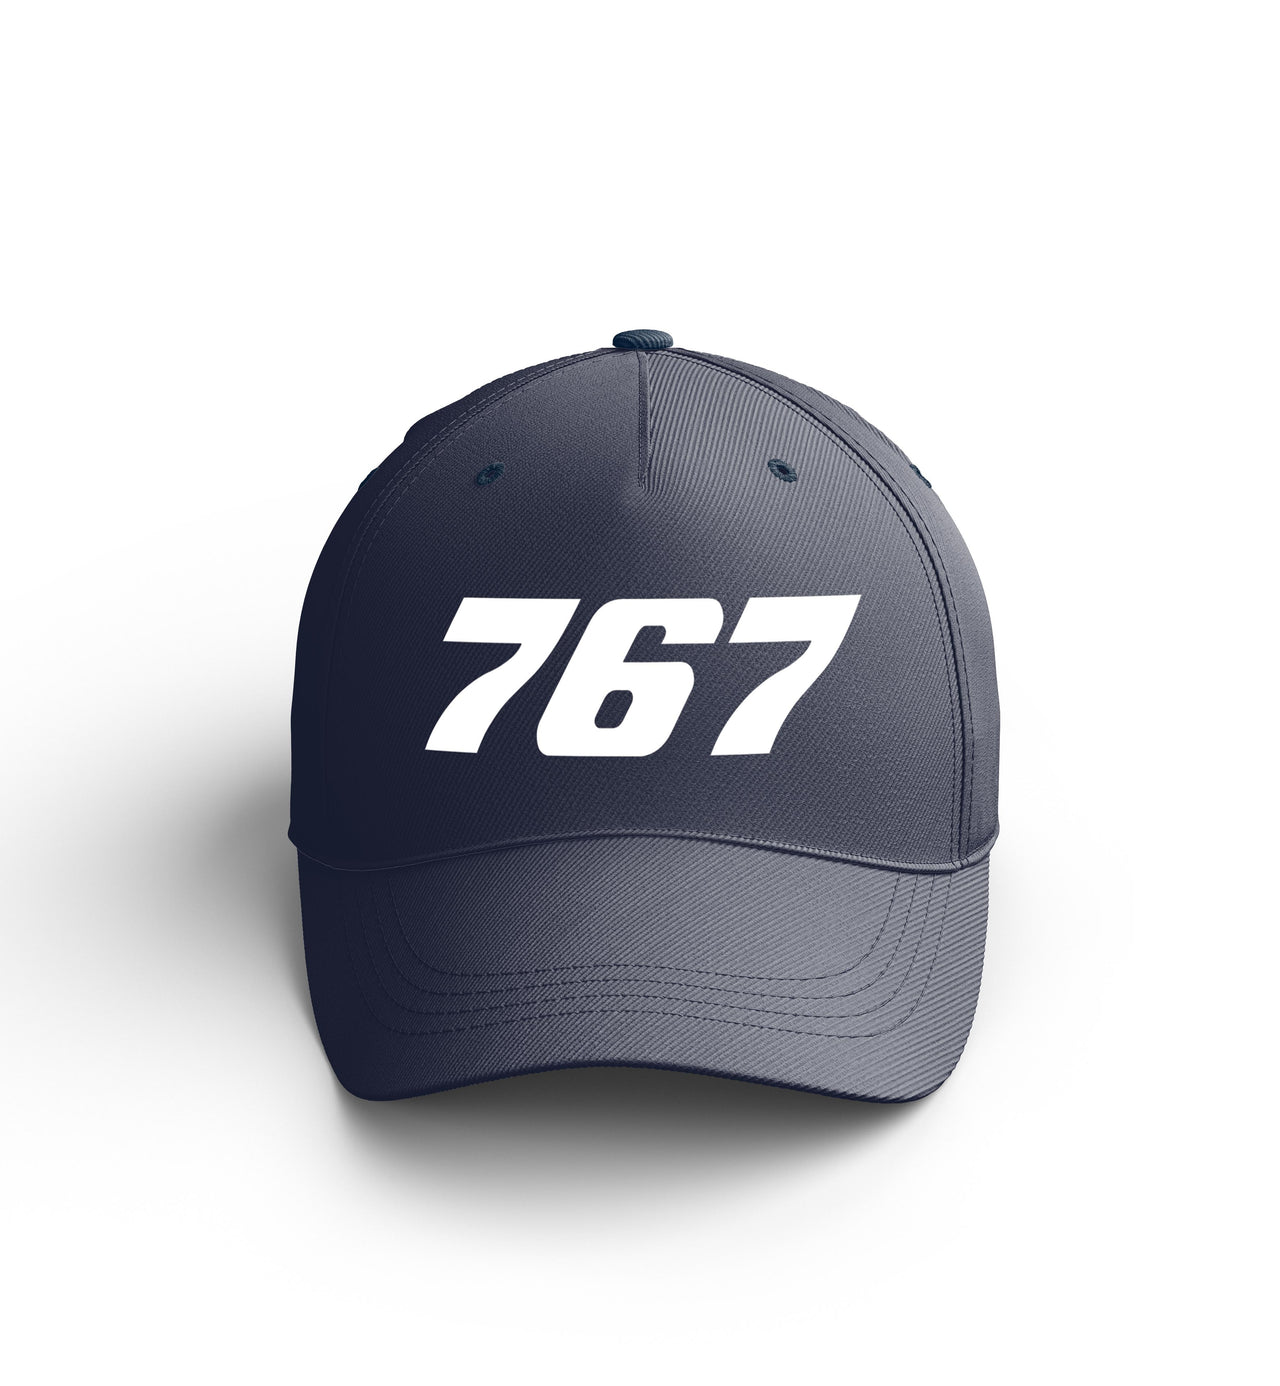 Customizable Name & 767 Flat Text Embroidered Hats